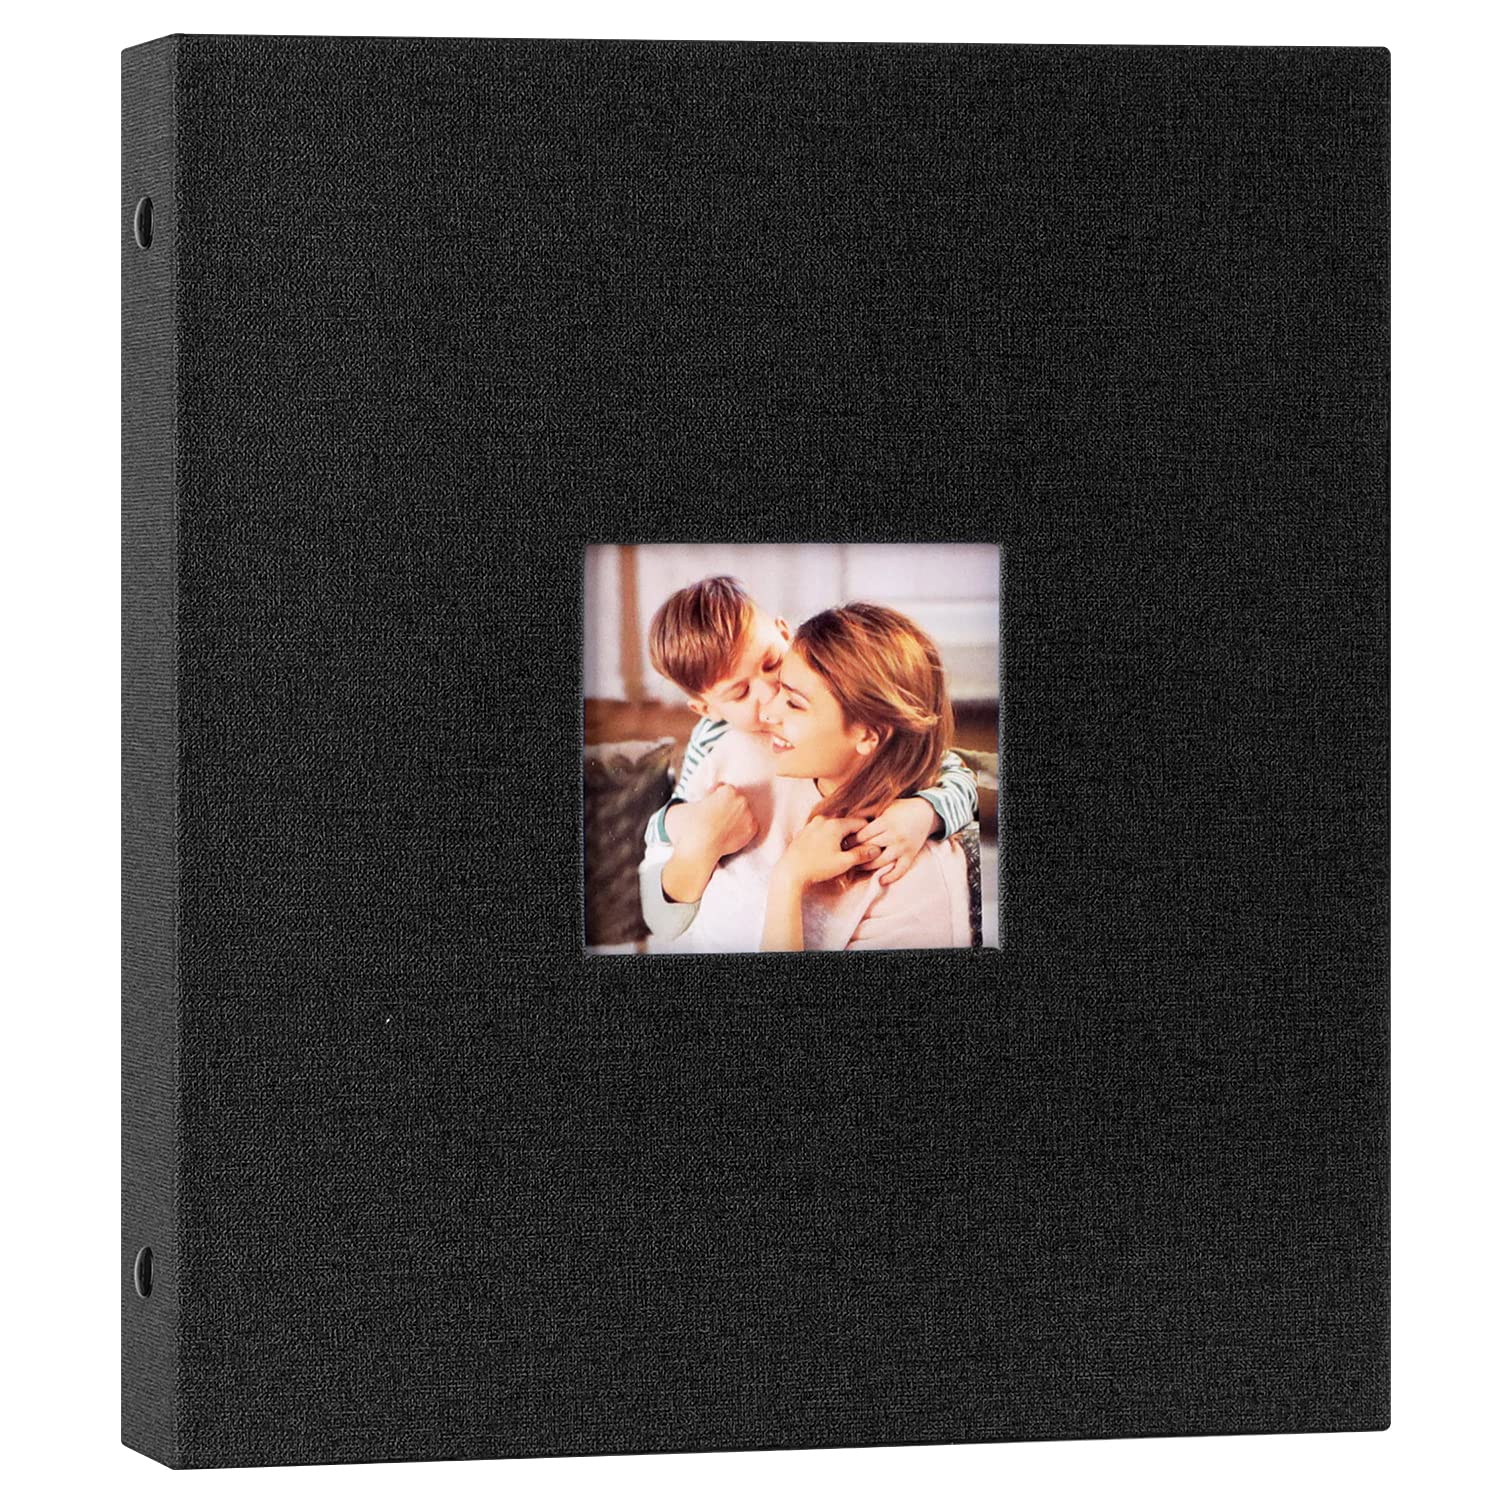 Lanpn Photo Album 11x14, Linen Hard Cover Acid Free Slip Slide in Photo  Albums Sleeves Holds 50 Top Load Vertical Only 11x14 Pictures (Grey)